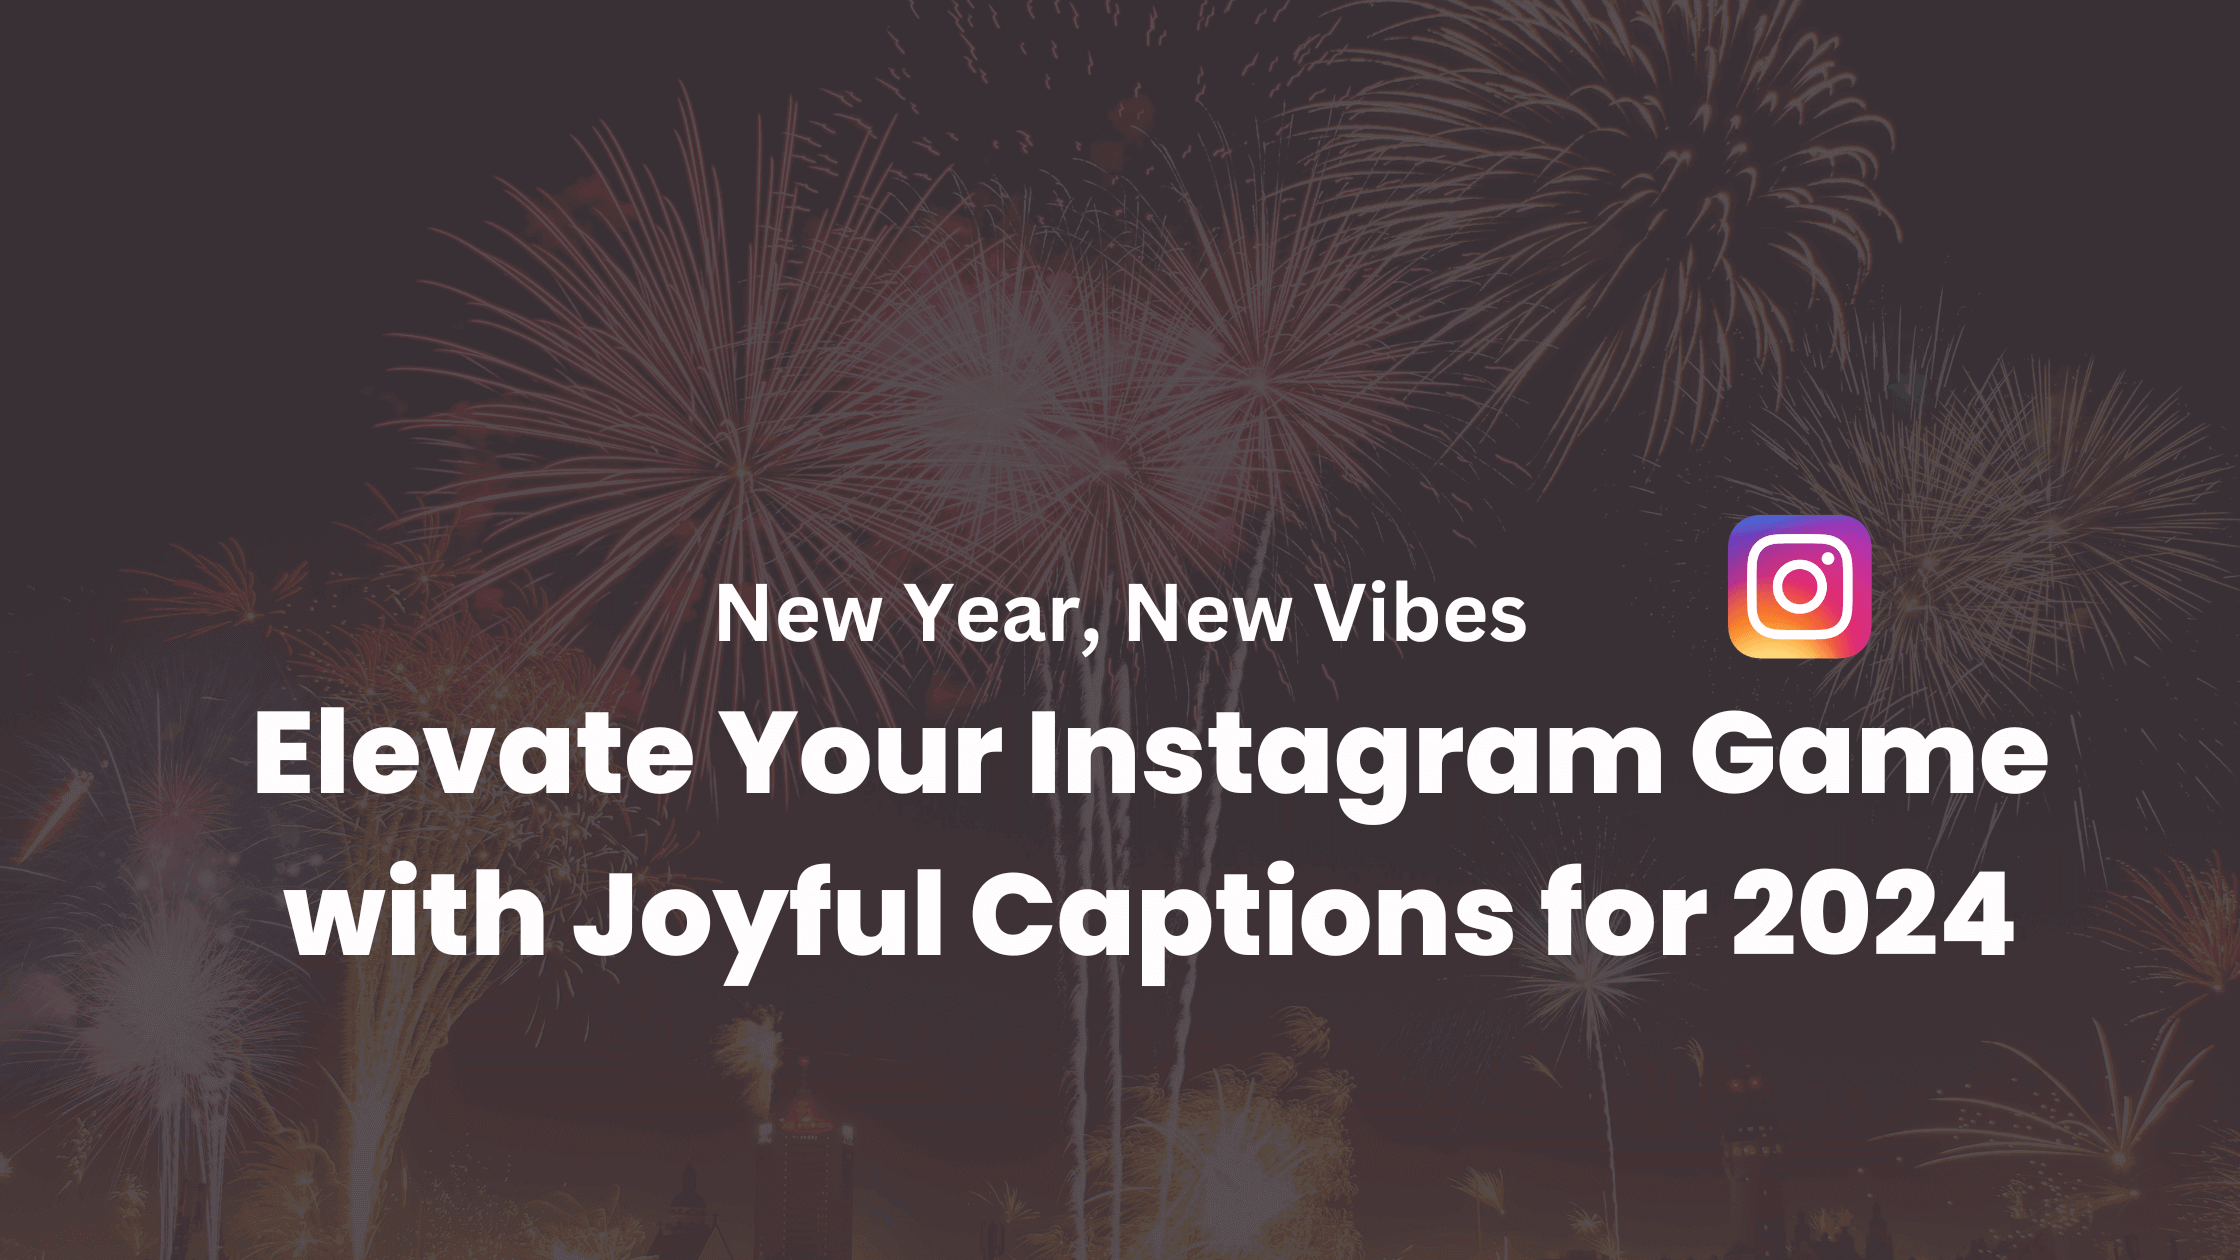 New Year, New Vibes: Elevate Your Instagram Game with Joyful Captions for 2024!